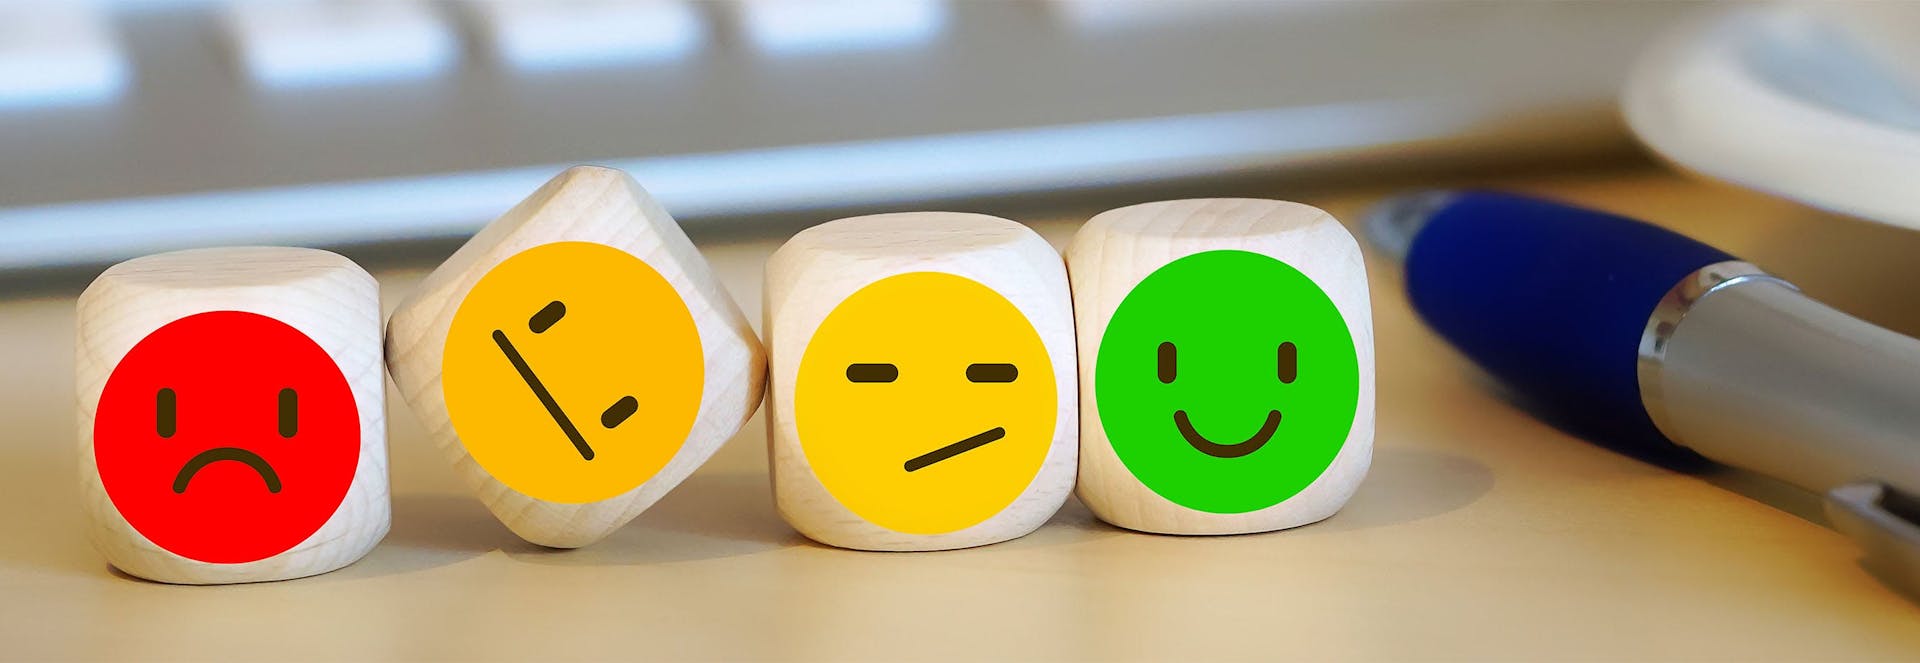 Dice with happy and sad faces on